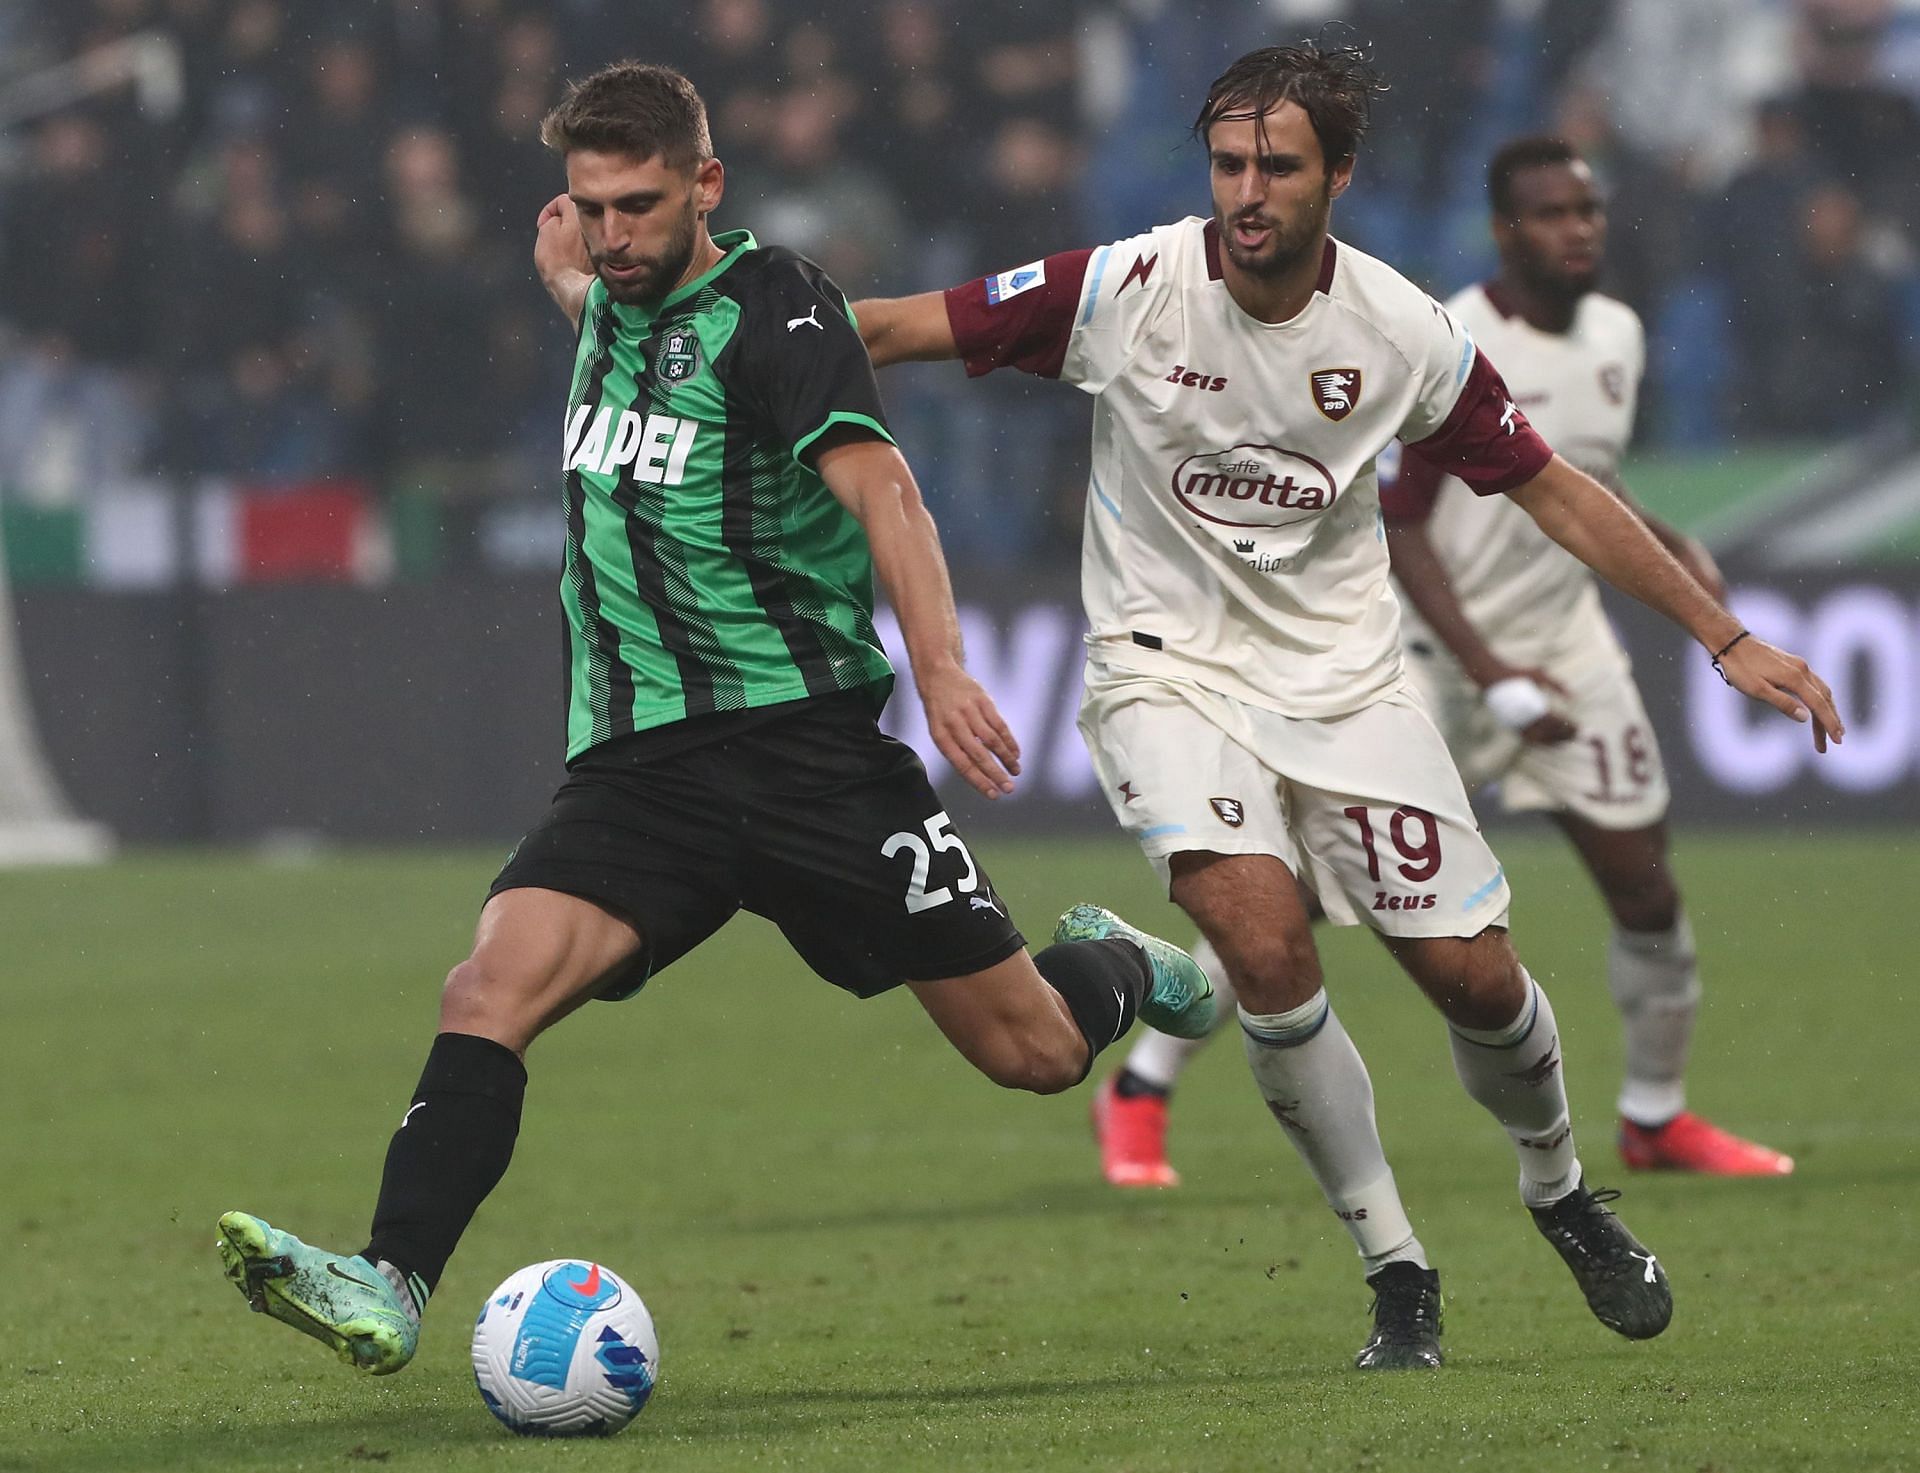 Salernitana host Sassuolo in their upcoming Serie A fixture on Saturday.